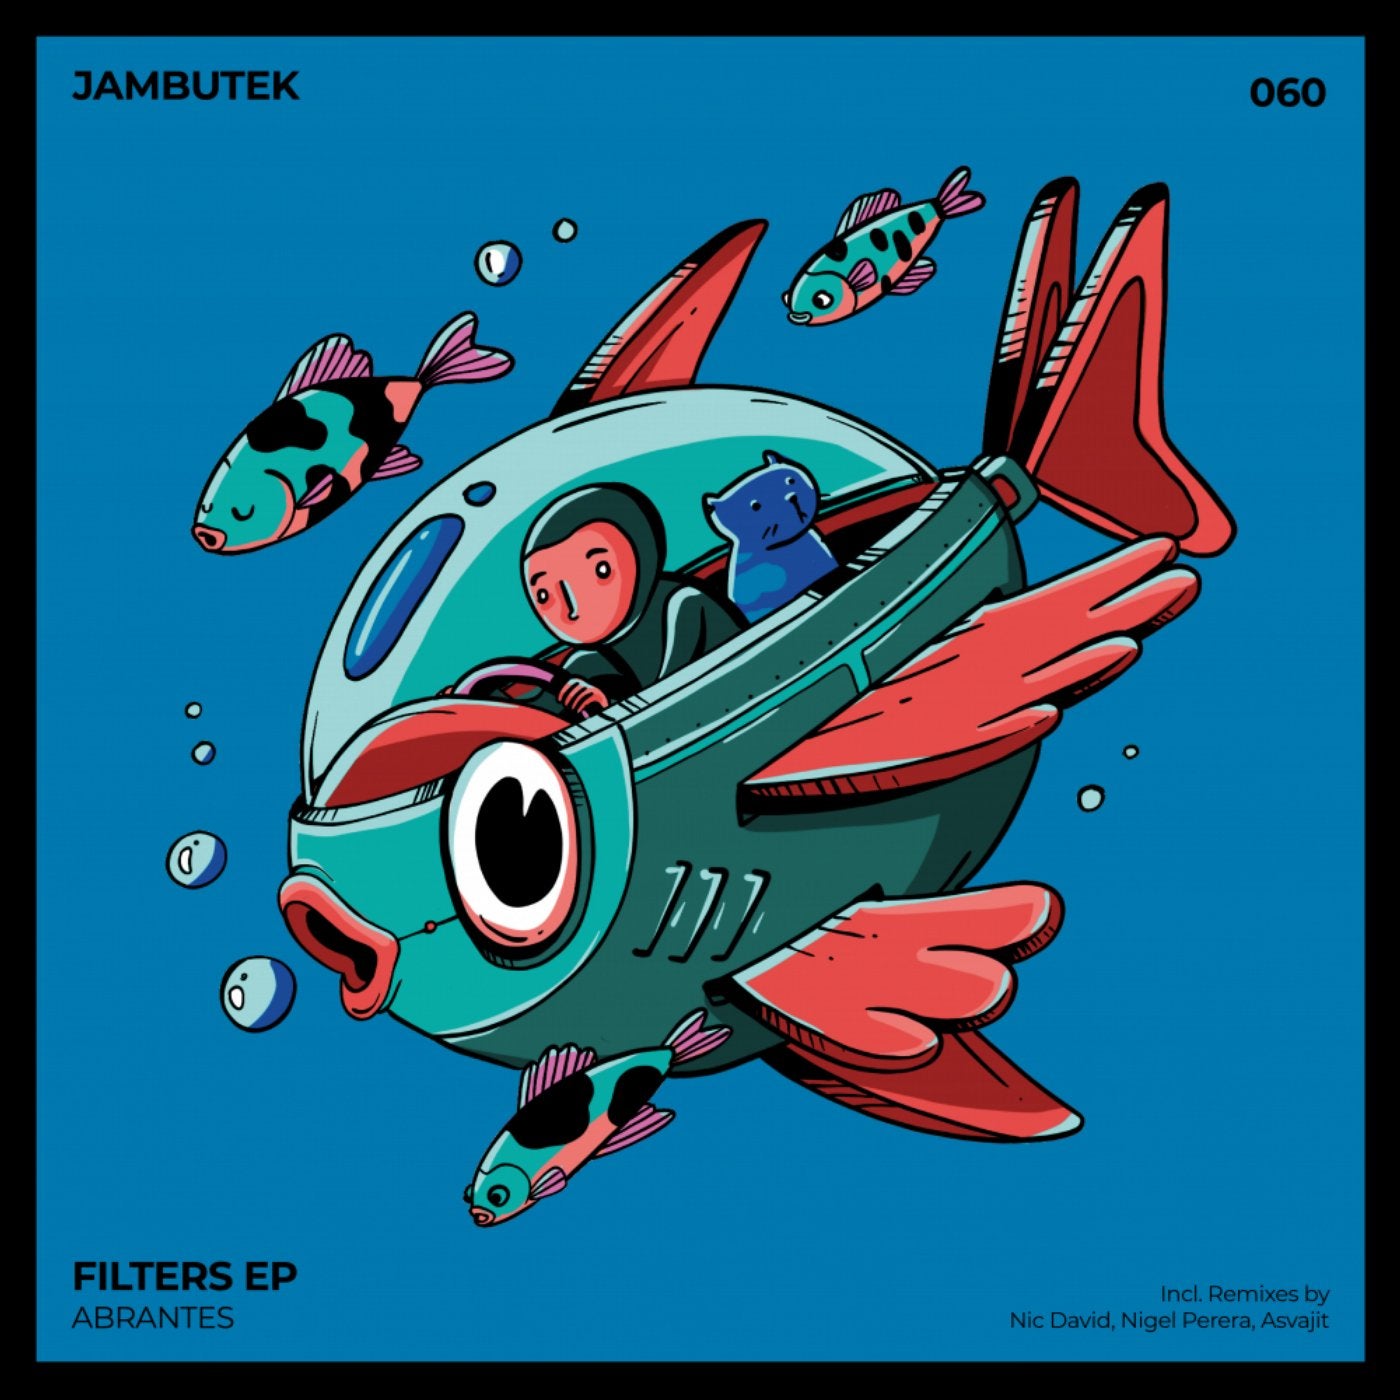 Filters EP